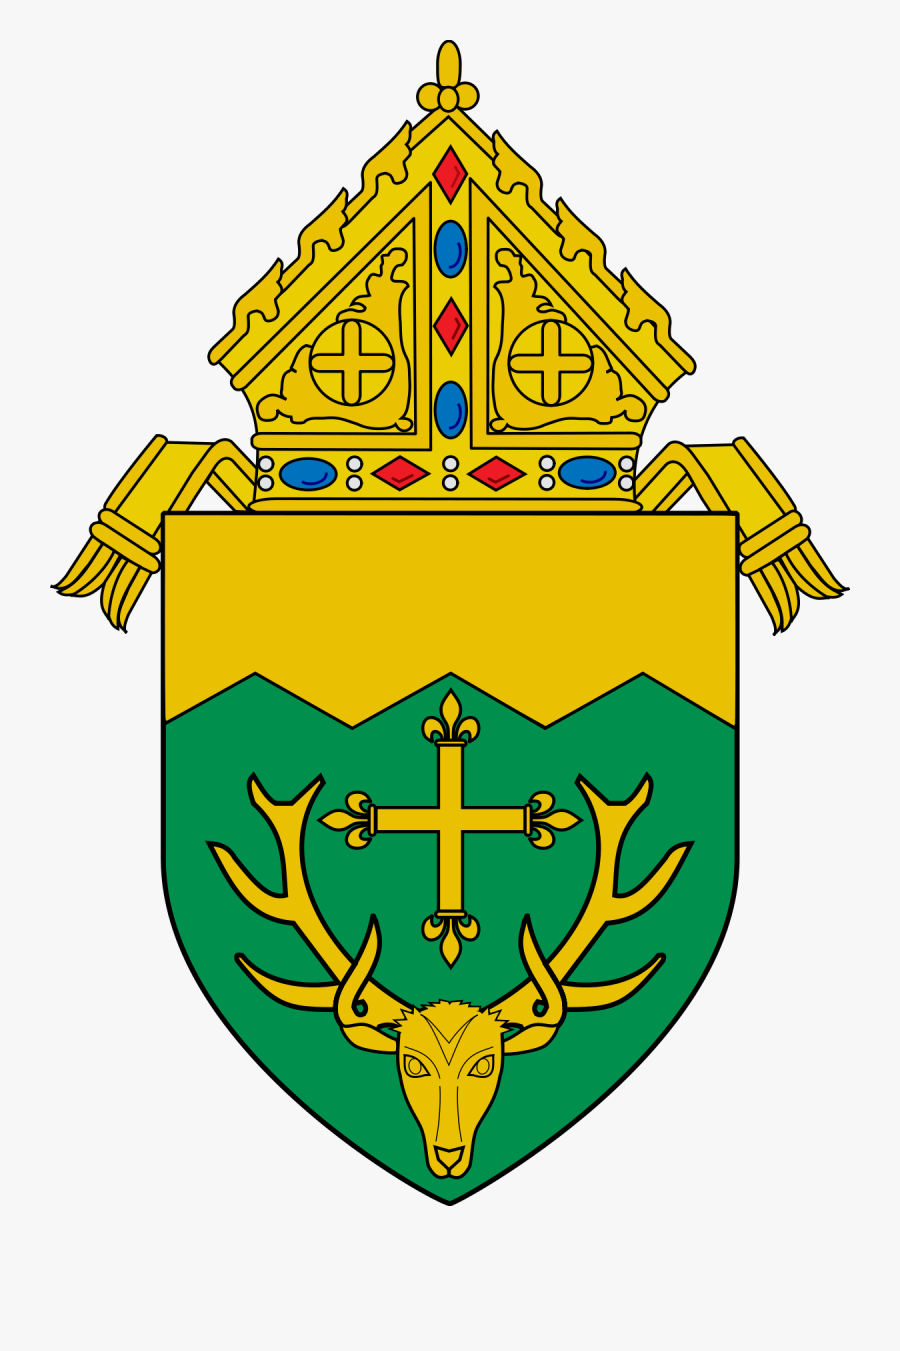 Roman Catholic Archdiocese Of Caceres, Transparent Clipart